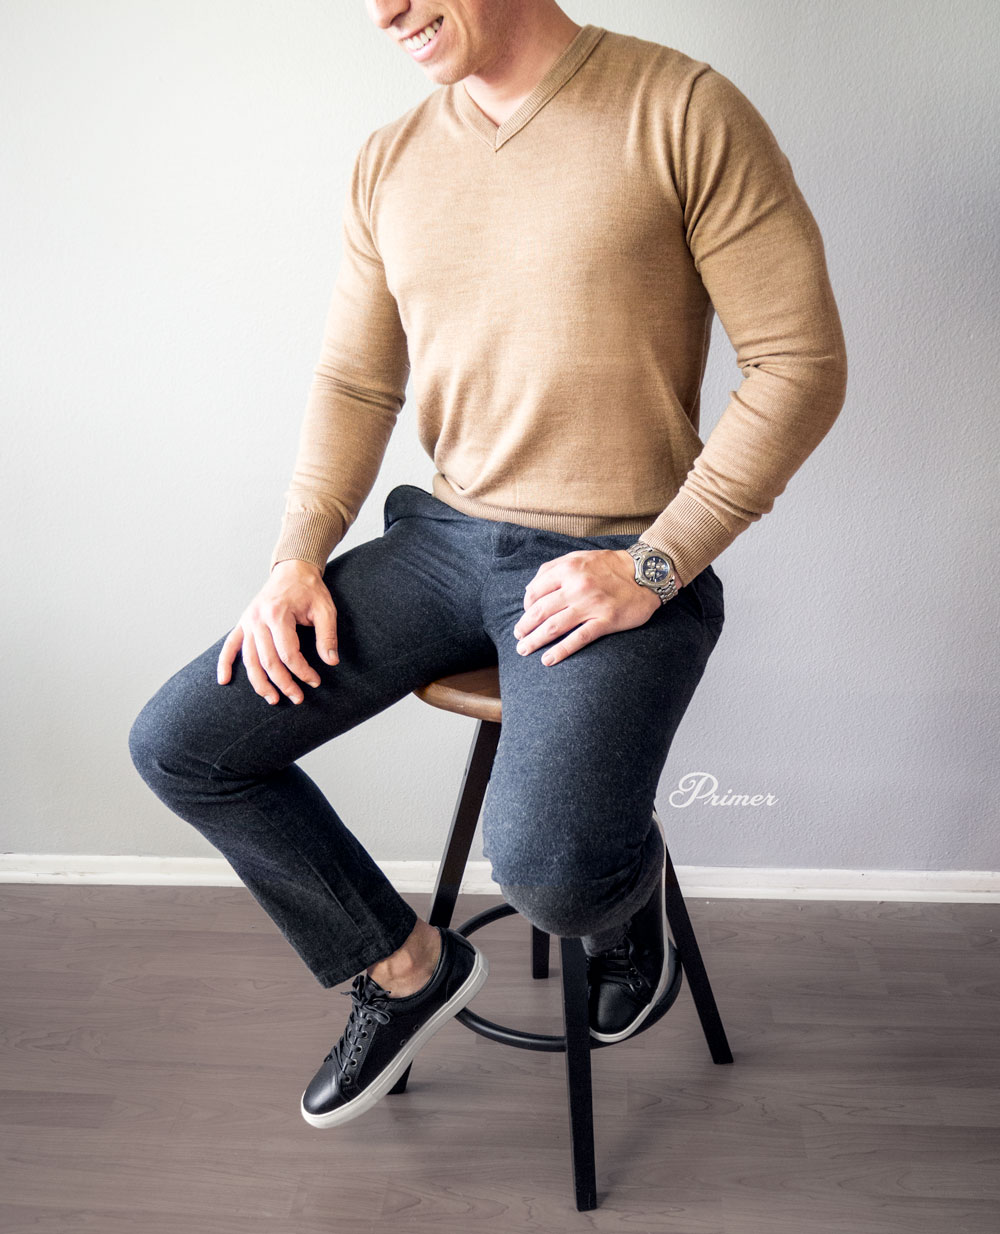 What to wear to a casual office   Casual office men's style inspiration